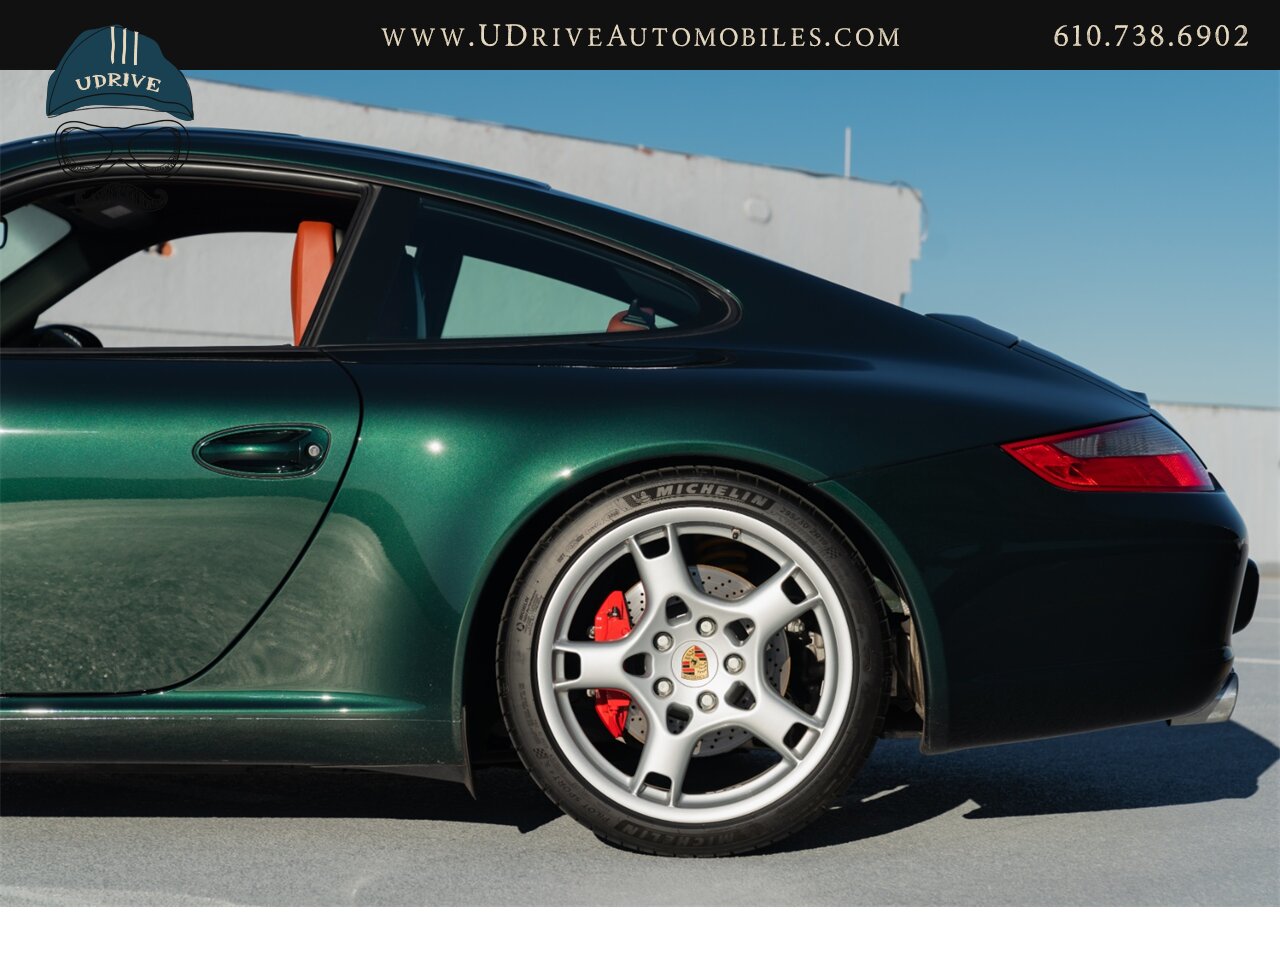 2007 Porsche 911 Carrera S 6Spd 997S RARE X51 Power Kit 381hp  1 of a Kind Forest Green over Blk/Terracotta Chrono Adap Sport Sts $113k MSRP - Photo 25 - West Chester, PA 19382